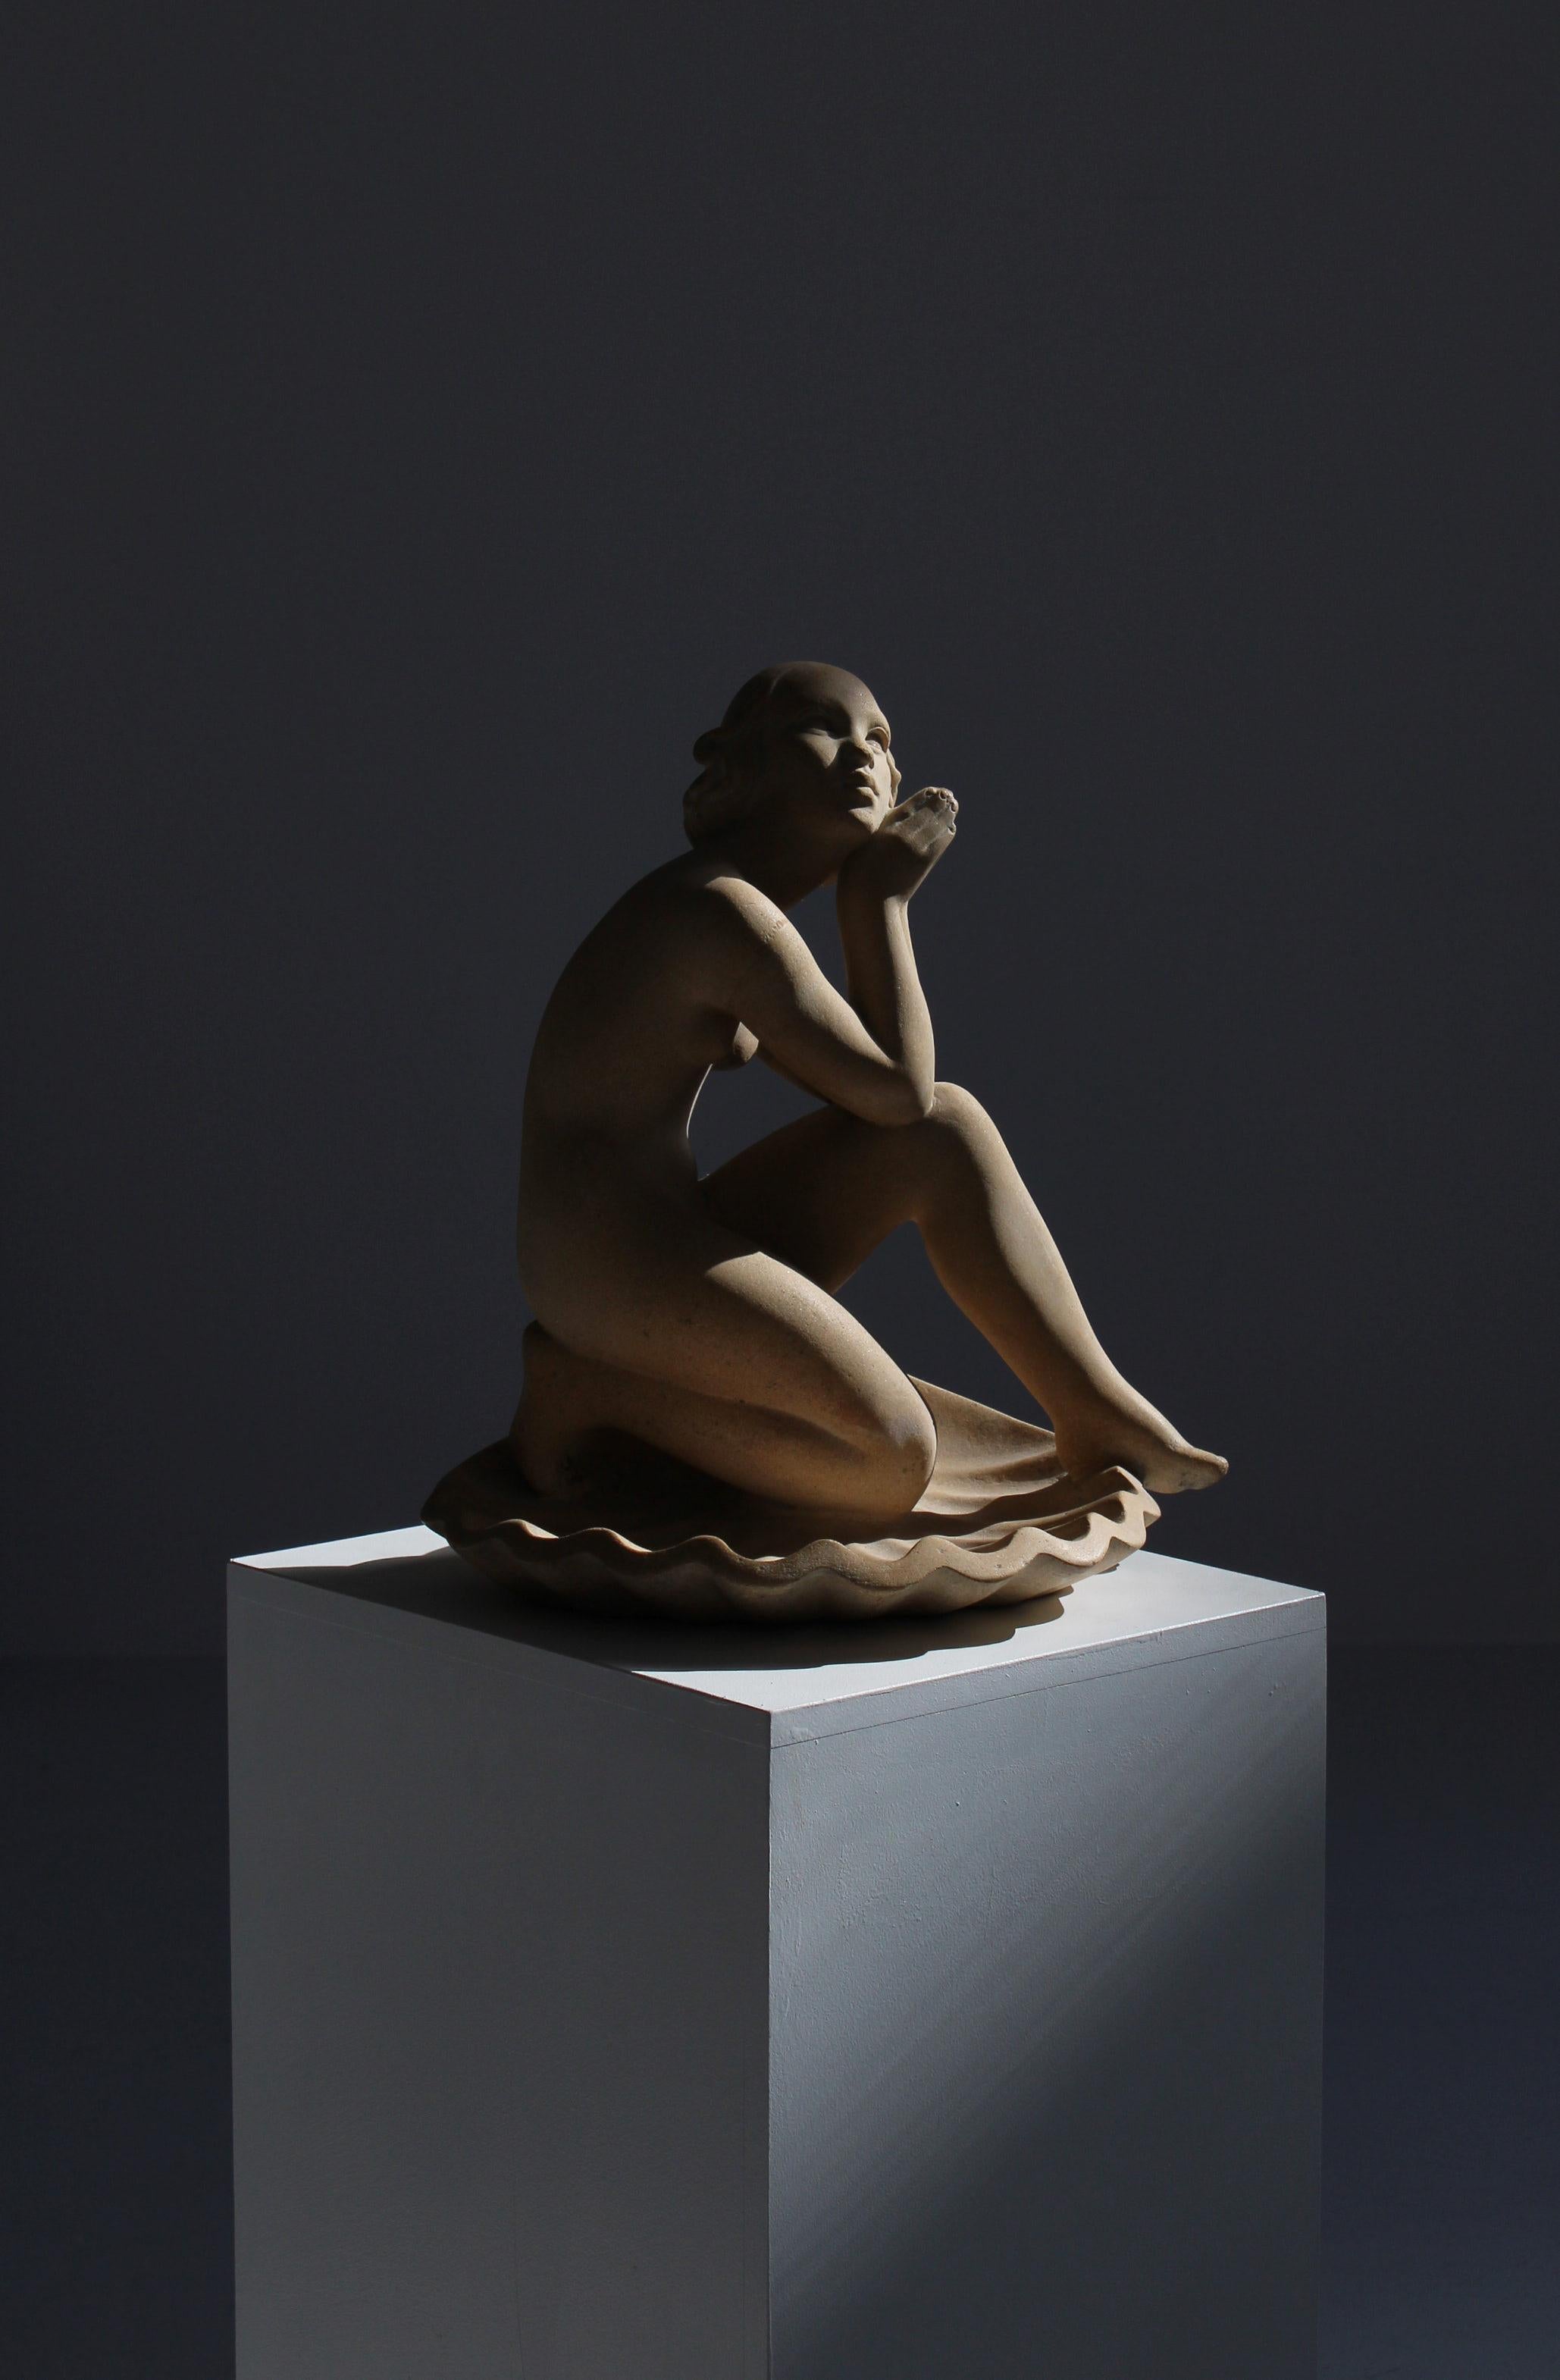 Large beautiful figurative sculpture by Danish artist Jens Jacob Bregnø in jugend style. The sculpture is made of raw sandstone and is signed by the artist. It depicts a woman figure sitting on a scallop shell - most probably the goddess Venus. Sold